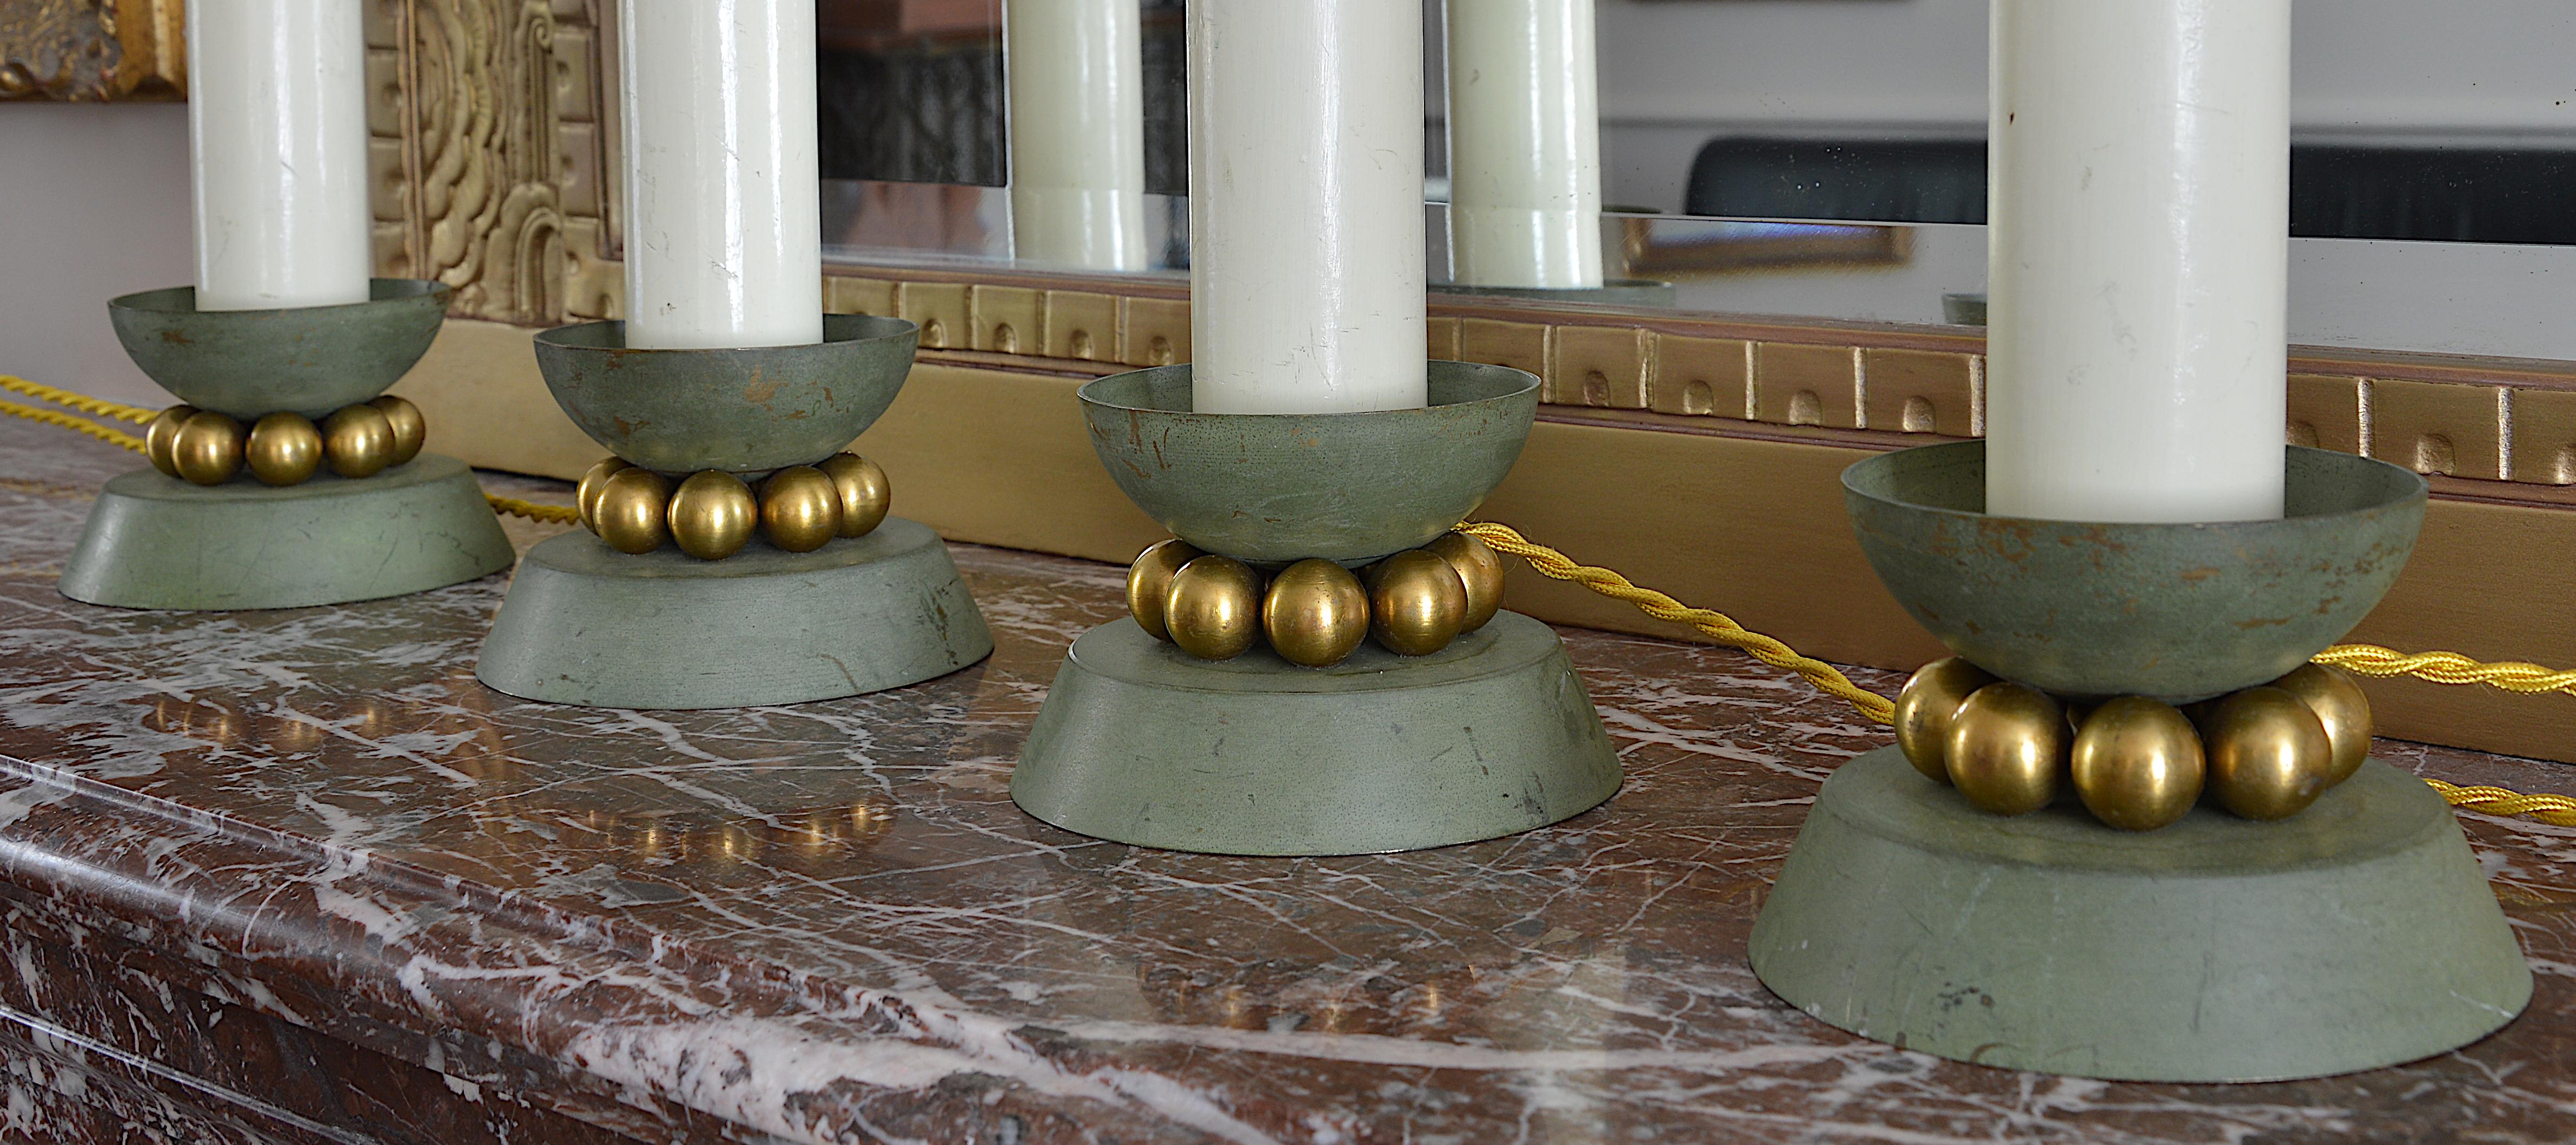 Bronze Exceptional and Decorative Set of Four Art Deco Candlestick Lamps, 1930s For Sale